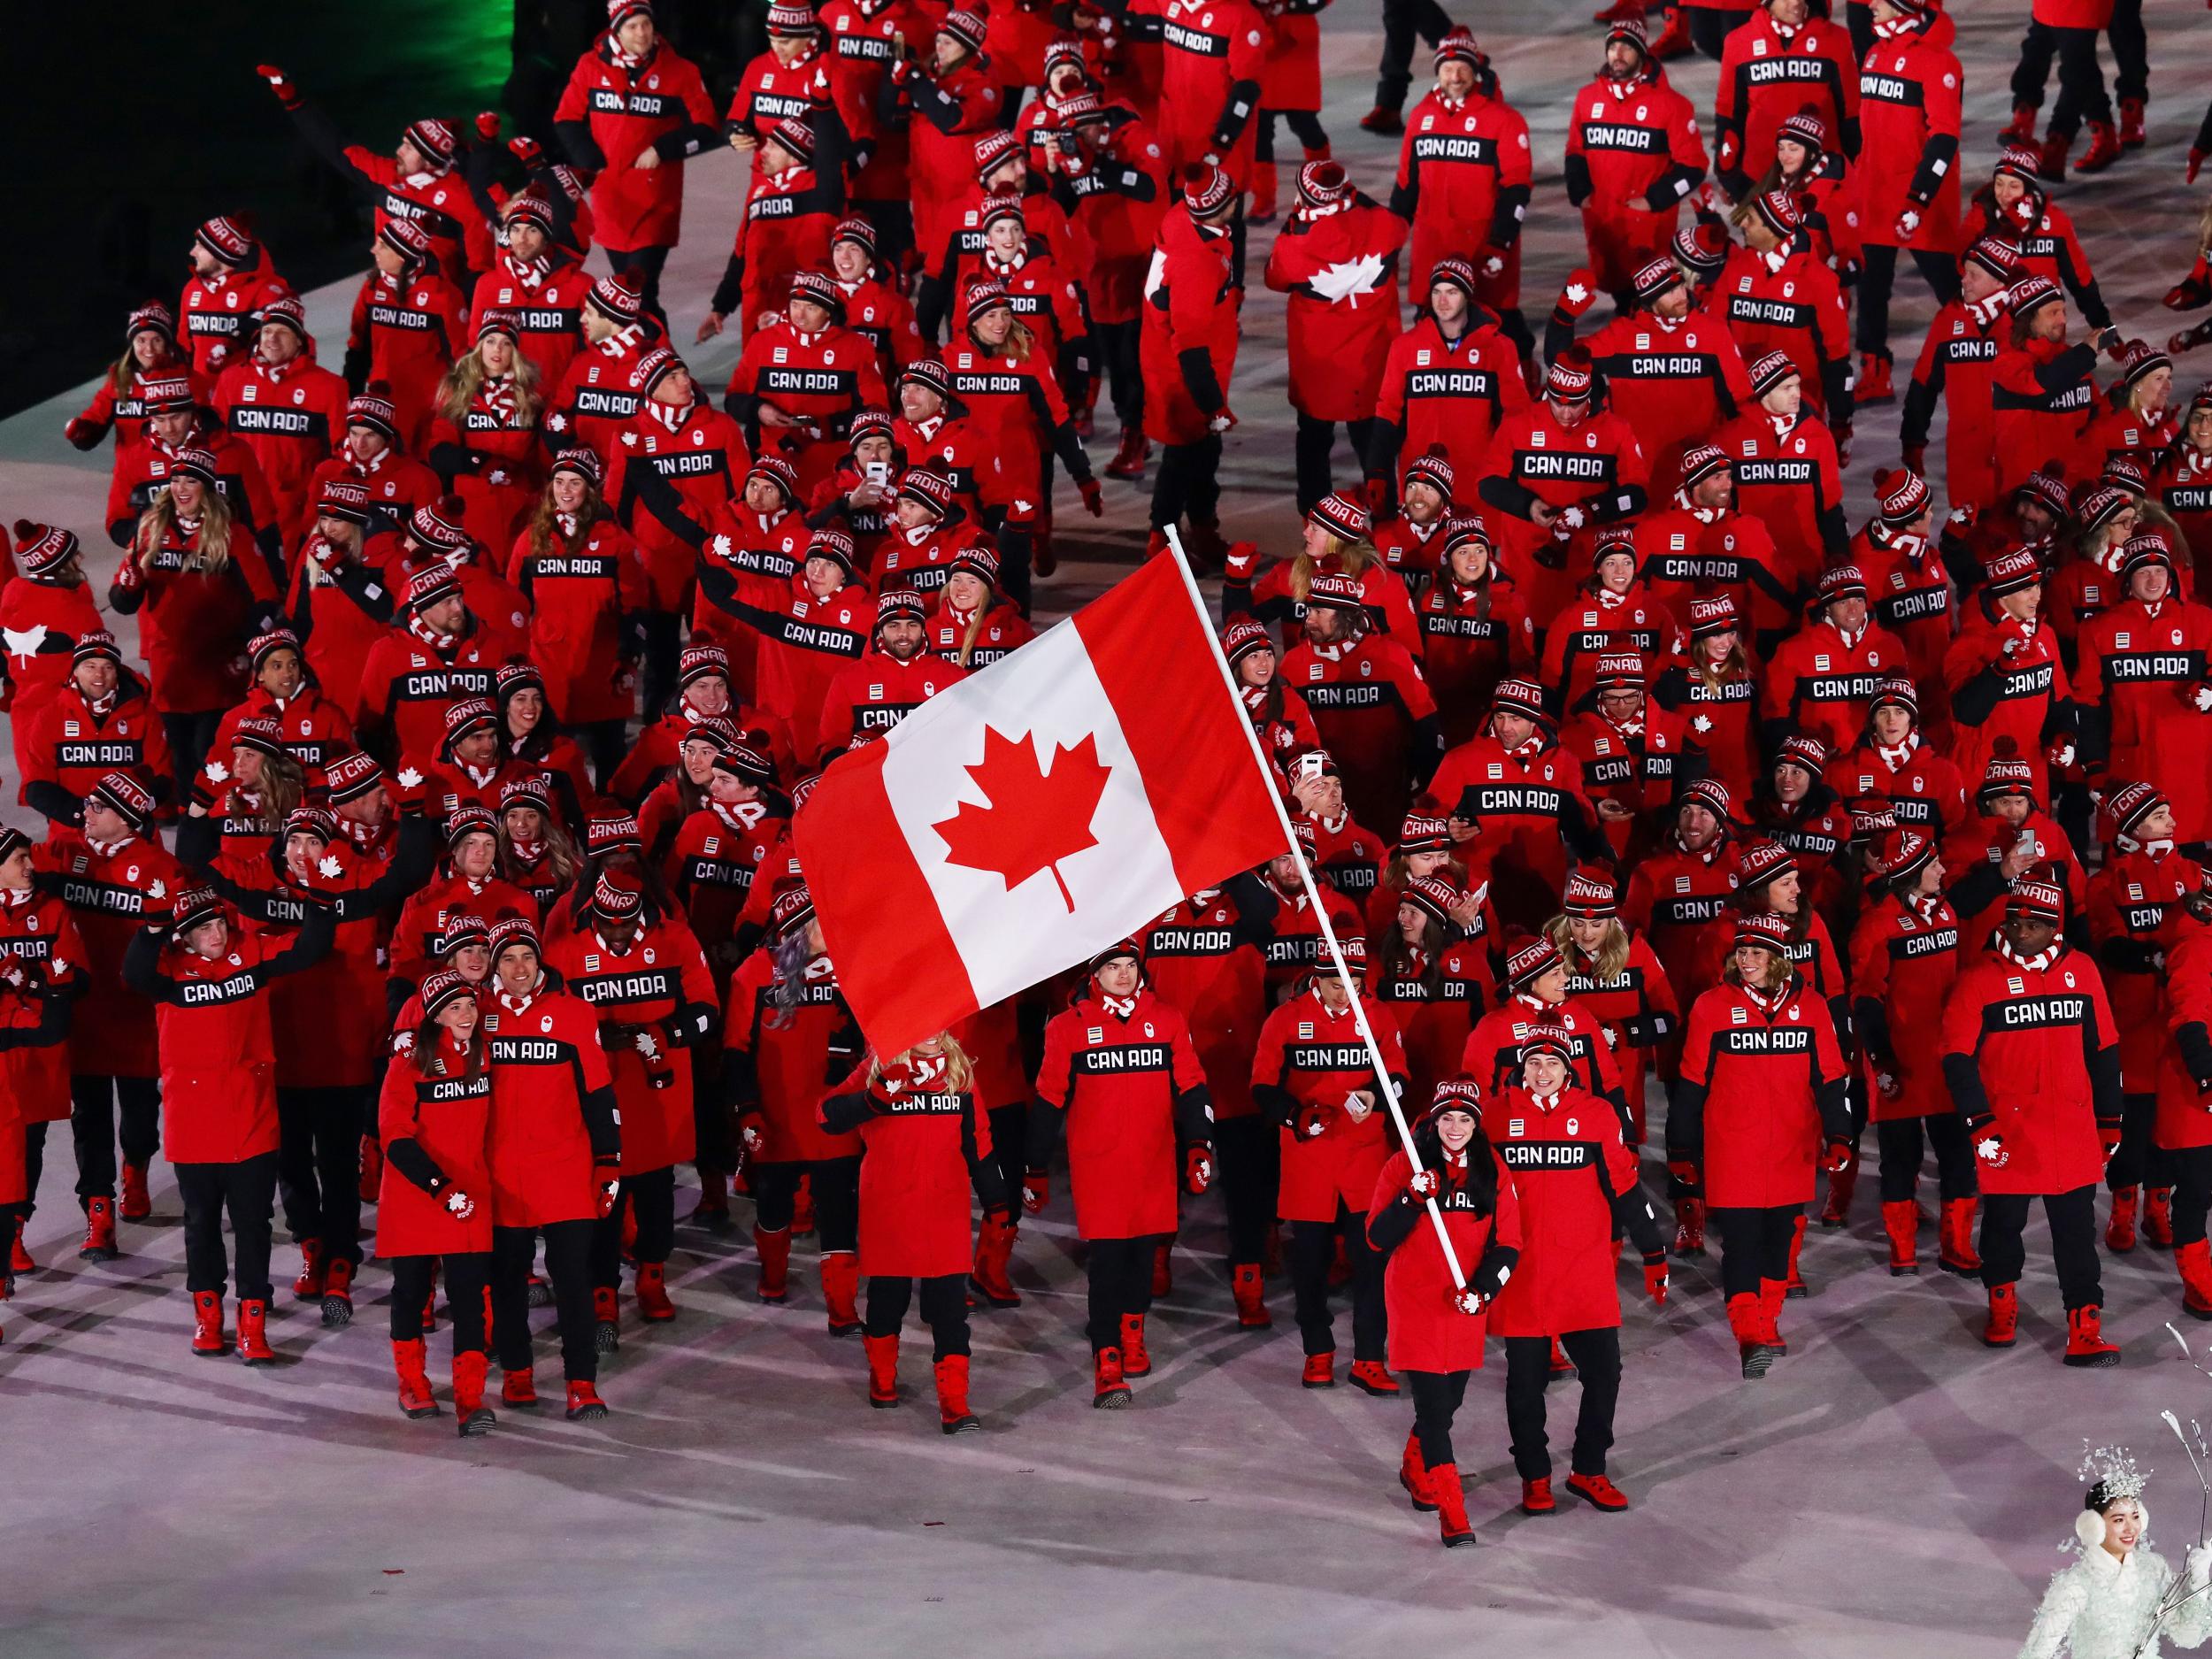 The athlete has not been named by Team Canada but police descriptions have revealed his identity